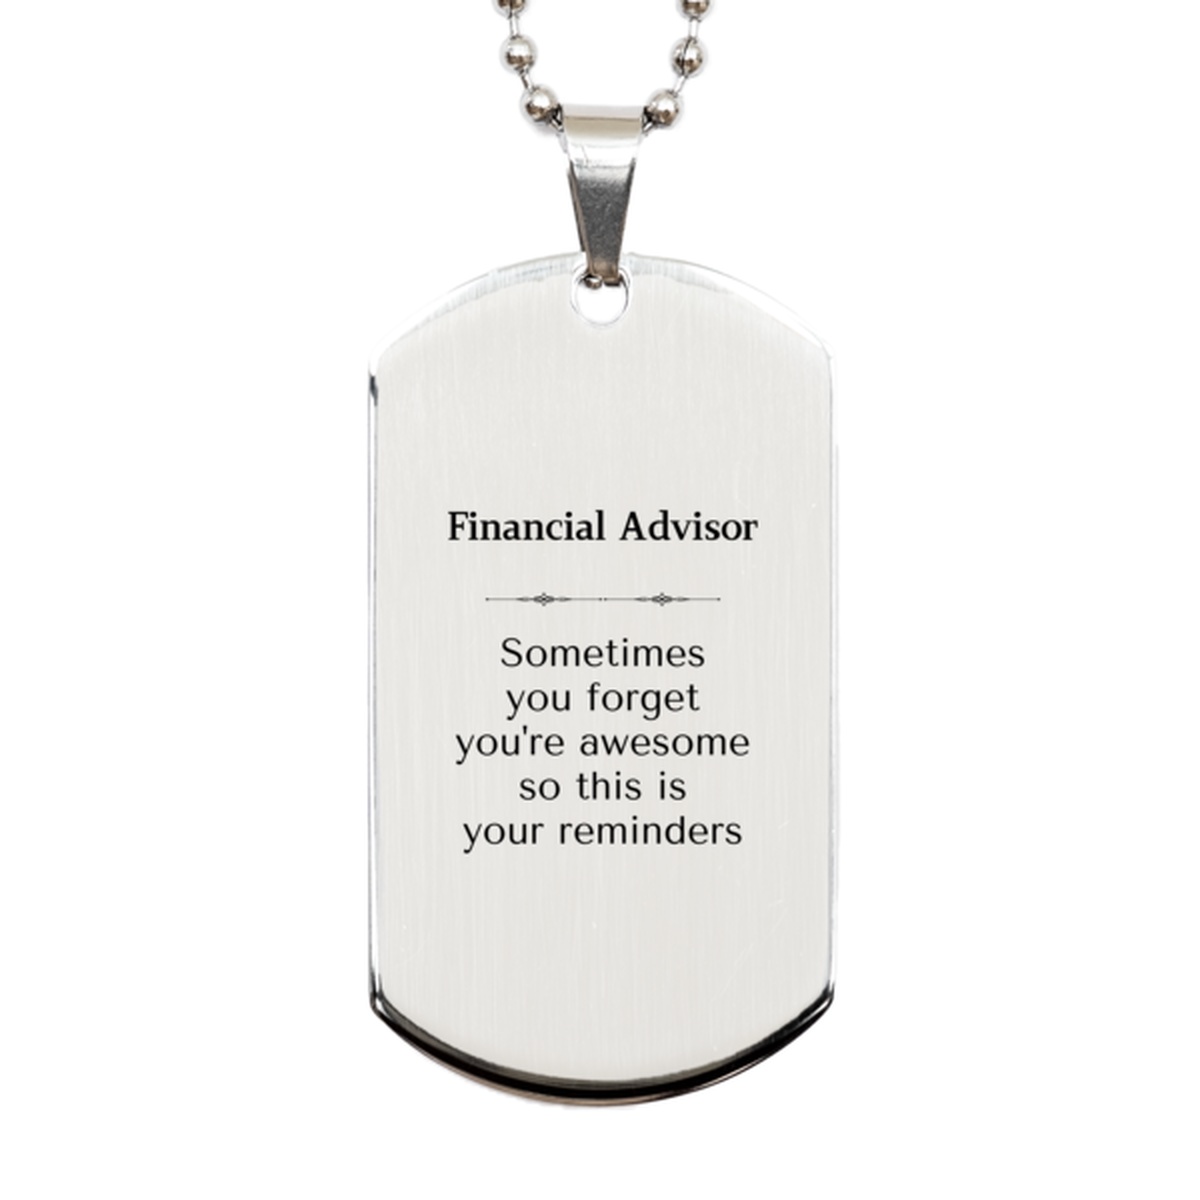 Sentimental Financial Advisor Silver Dog Tag, Financial Advisor Sometimes you forget you're awesome so this is your reminders, Graduation Christmas Birthday Gifts for Financial Advisor, Men, Women, Coworkers